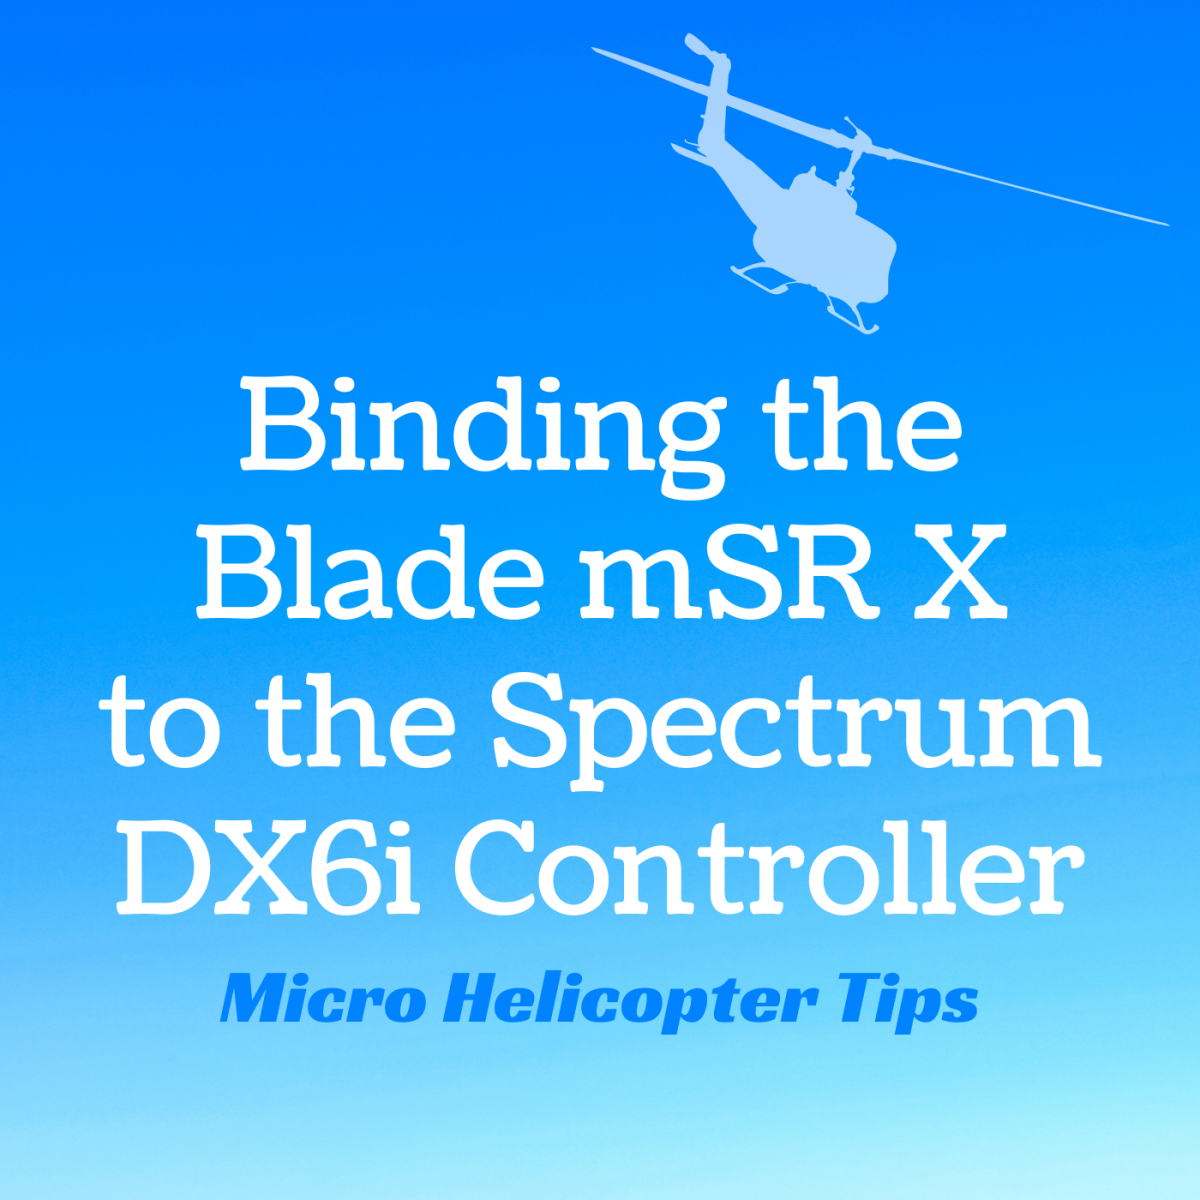 How to Bind and Trim the E-flite Blade mSR X Helicopter to the Spektrum DX6i Transmitter